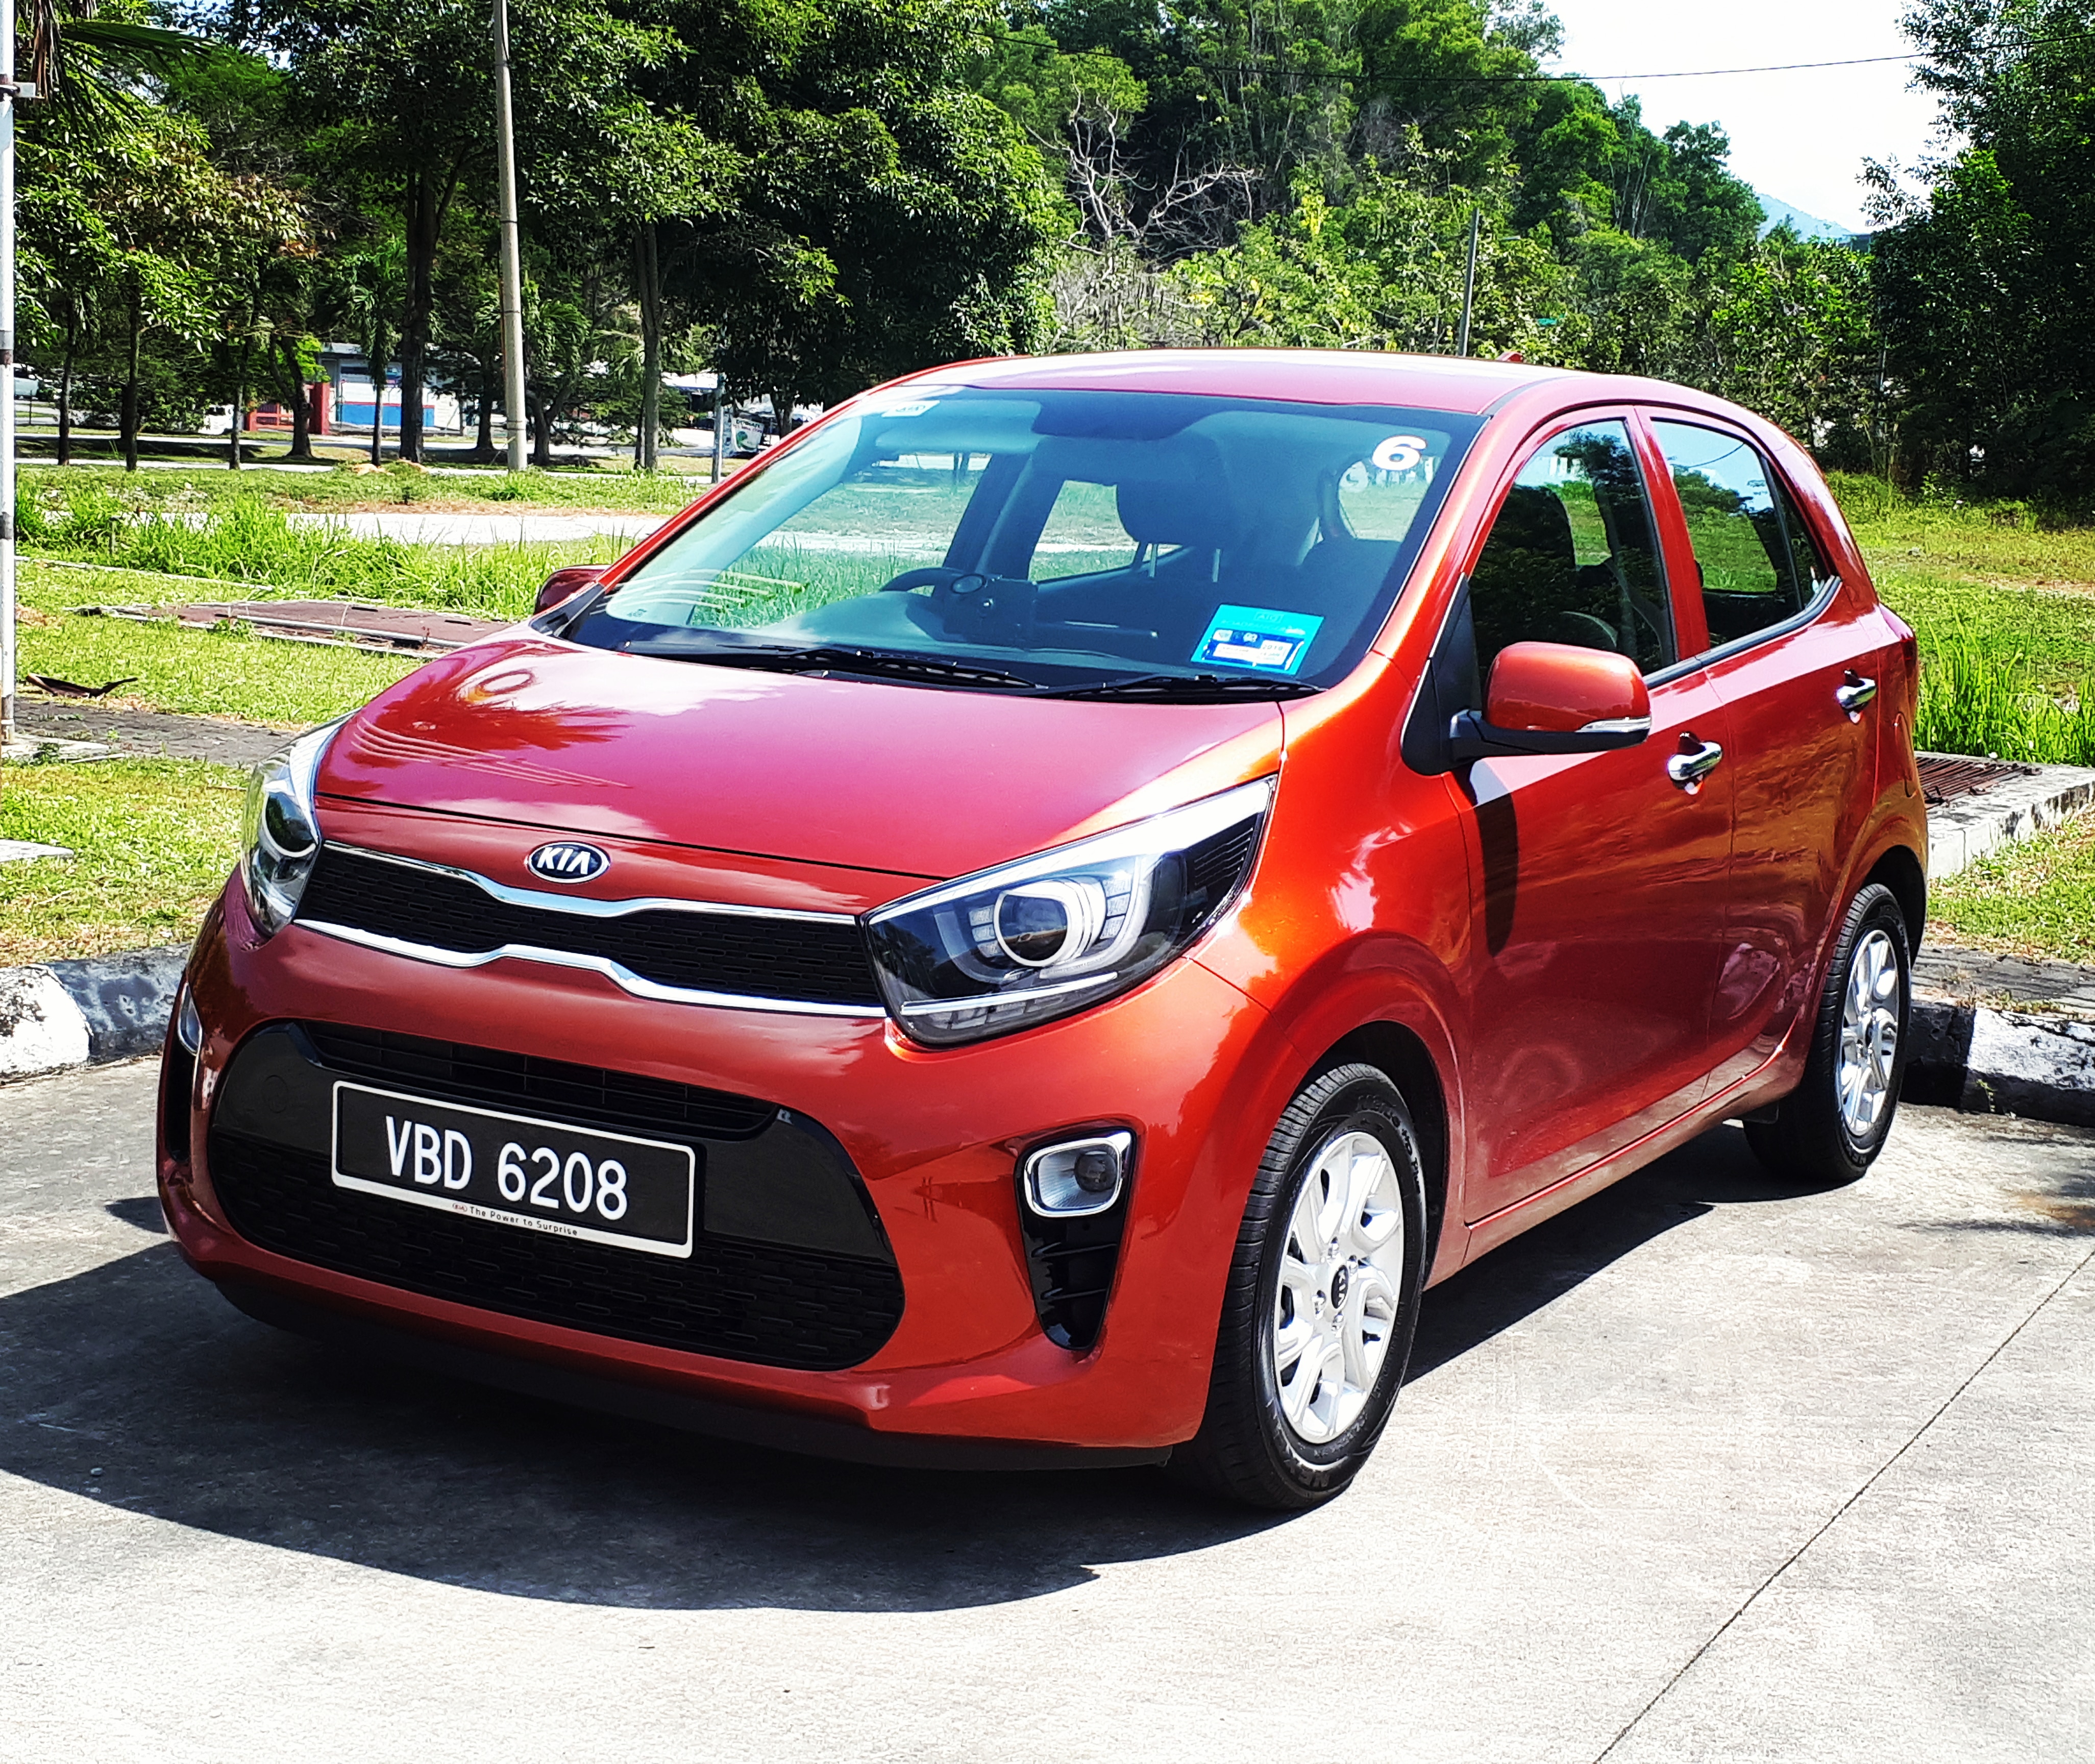 VIDEO 2018 Kia Picanto First Impression! News and